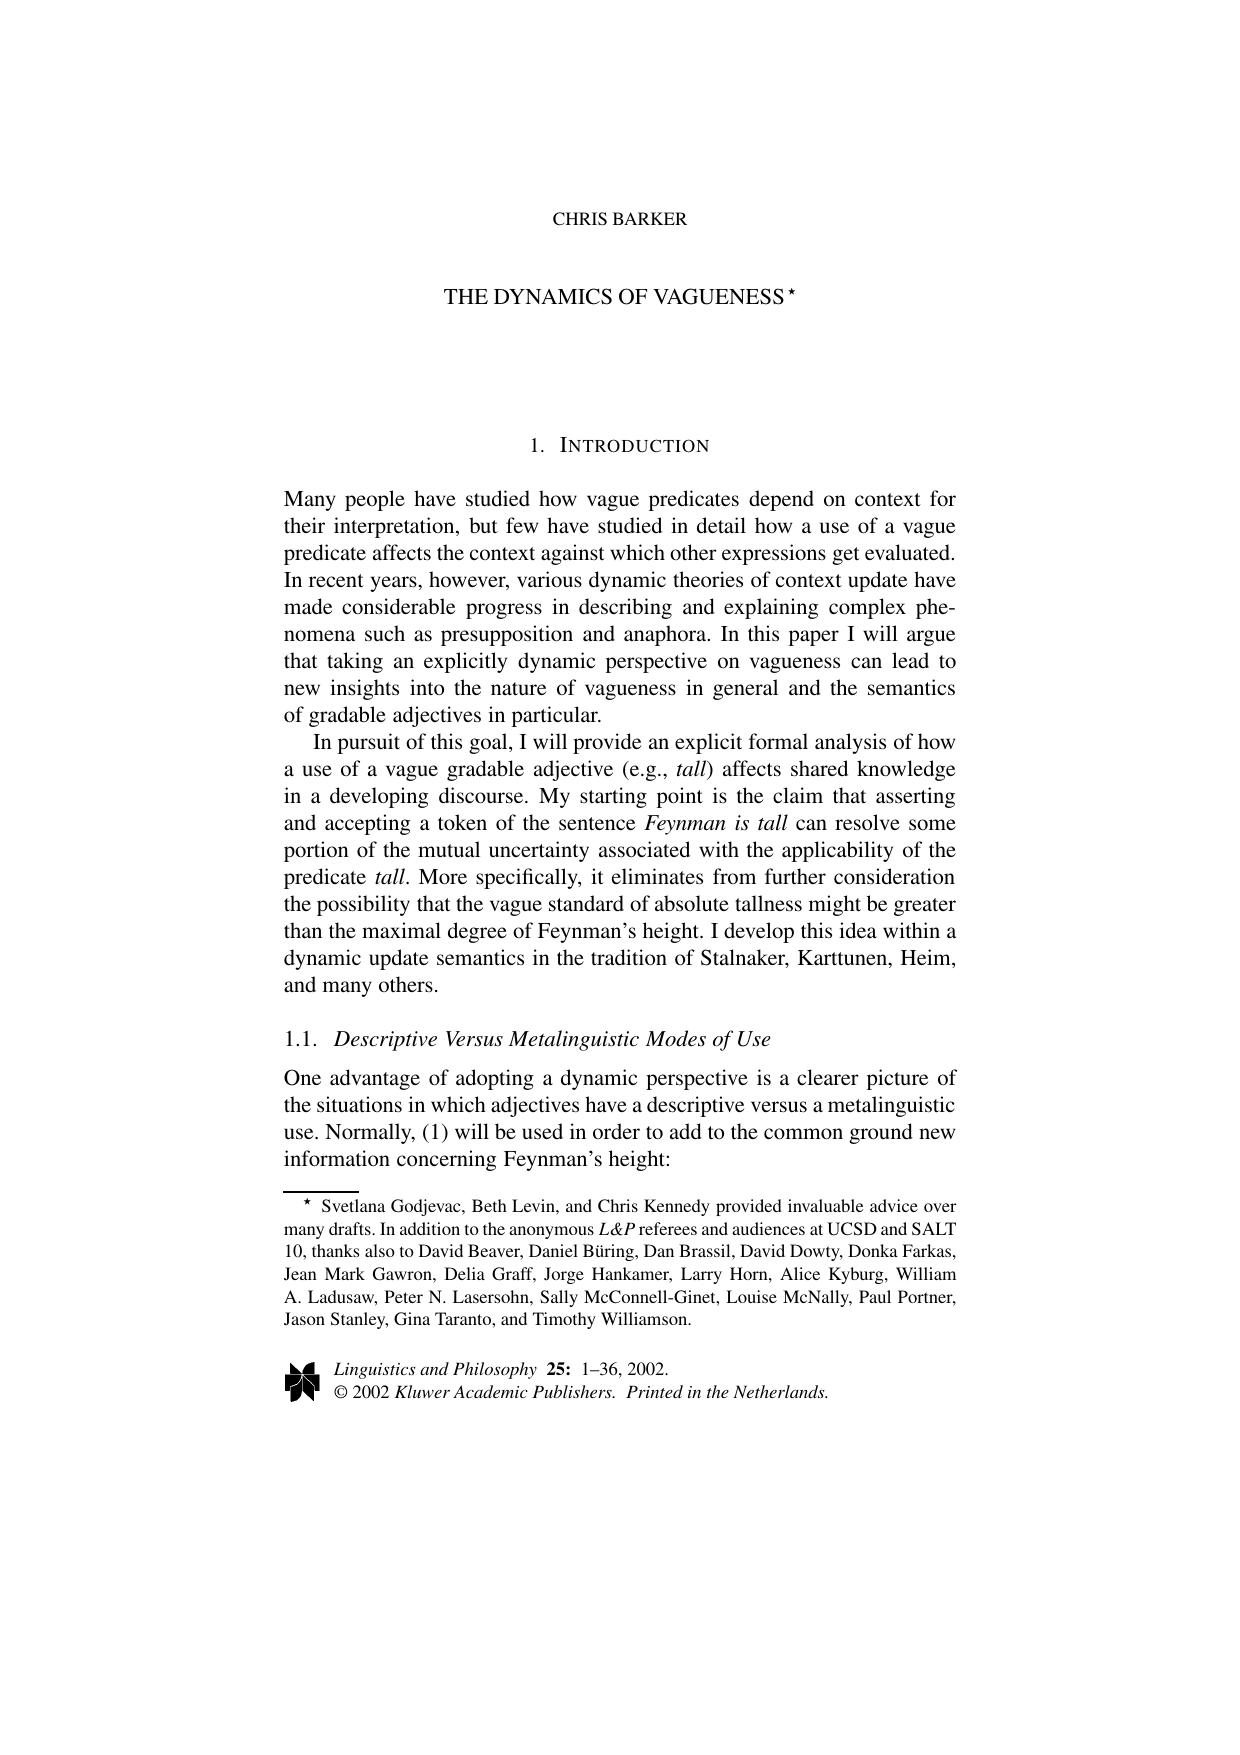 Linguistics and Philosophy, 2002, vol. 25, issue 1- the dynamics of vagueness